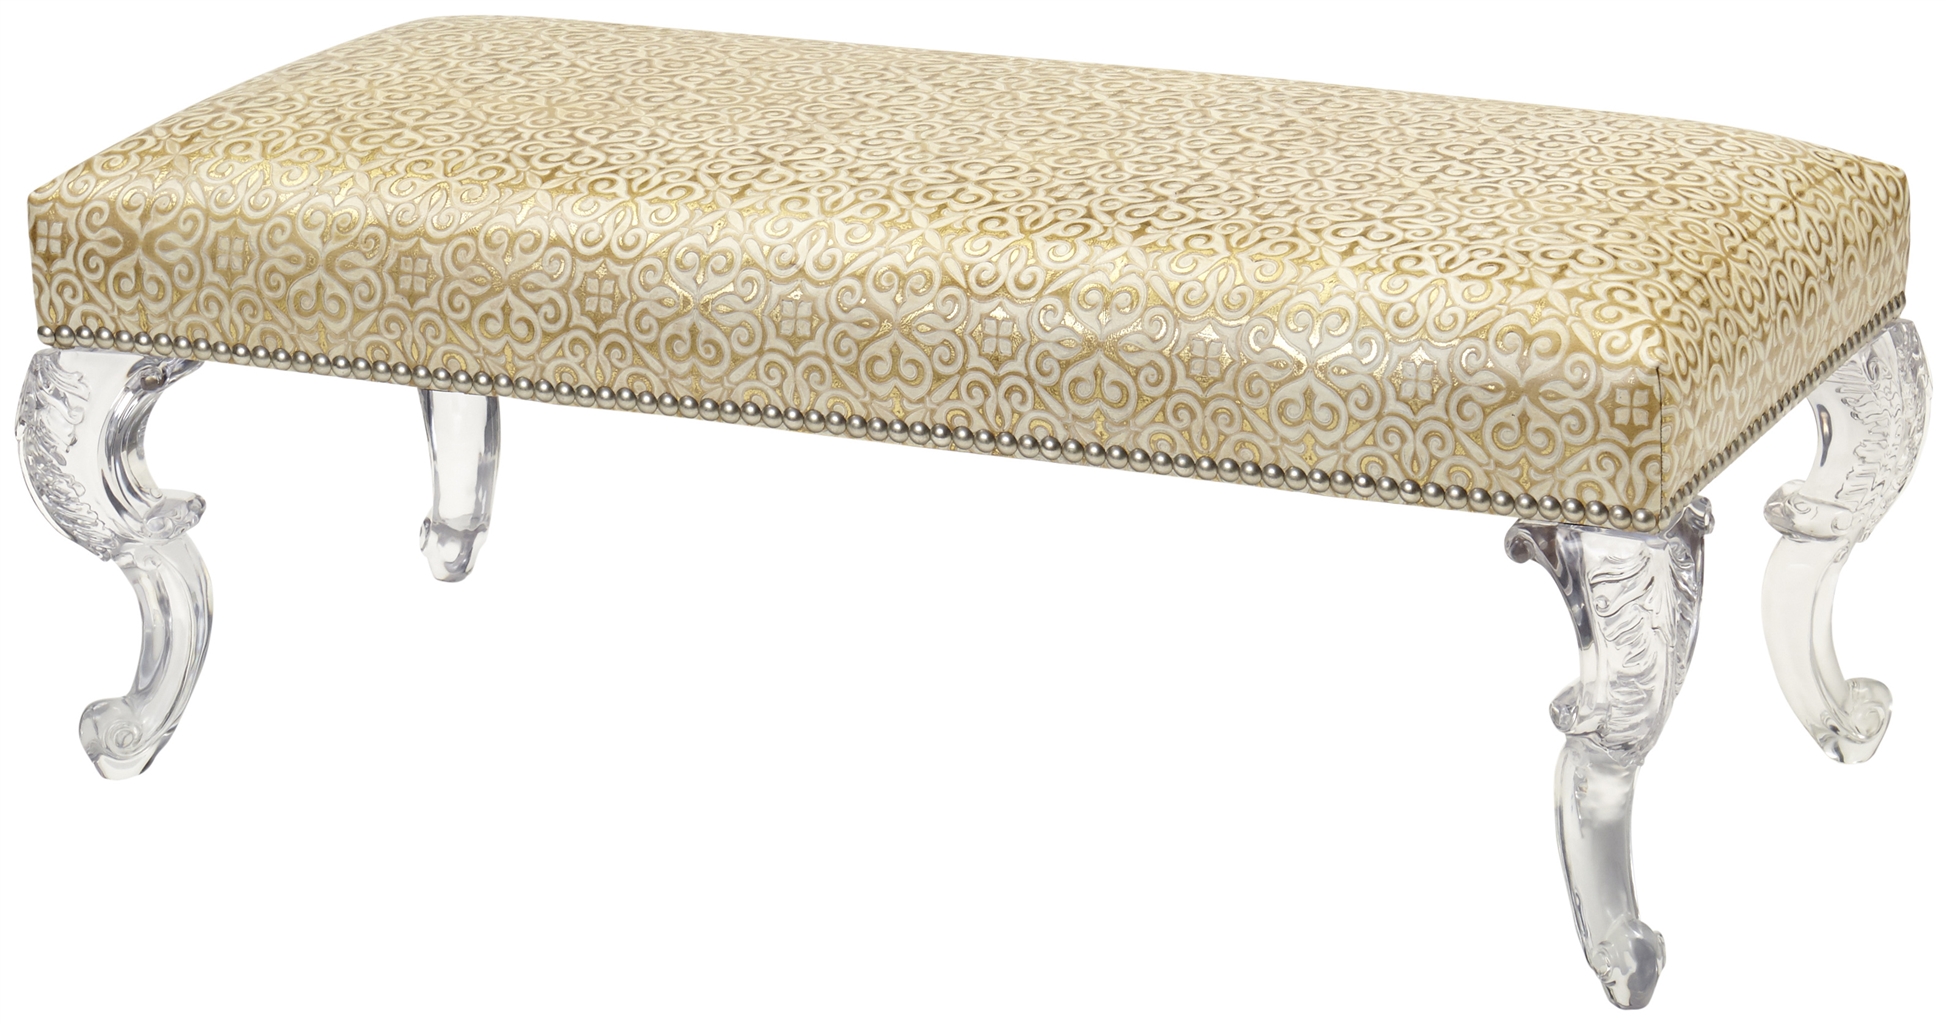 Luxury Leather & Upholstered Furniture Leather Upholstered Bench with beautifully curved legs